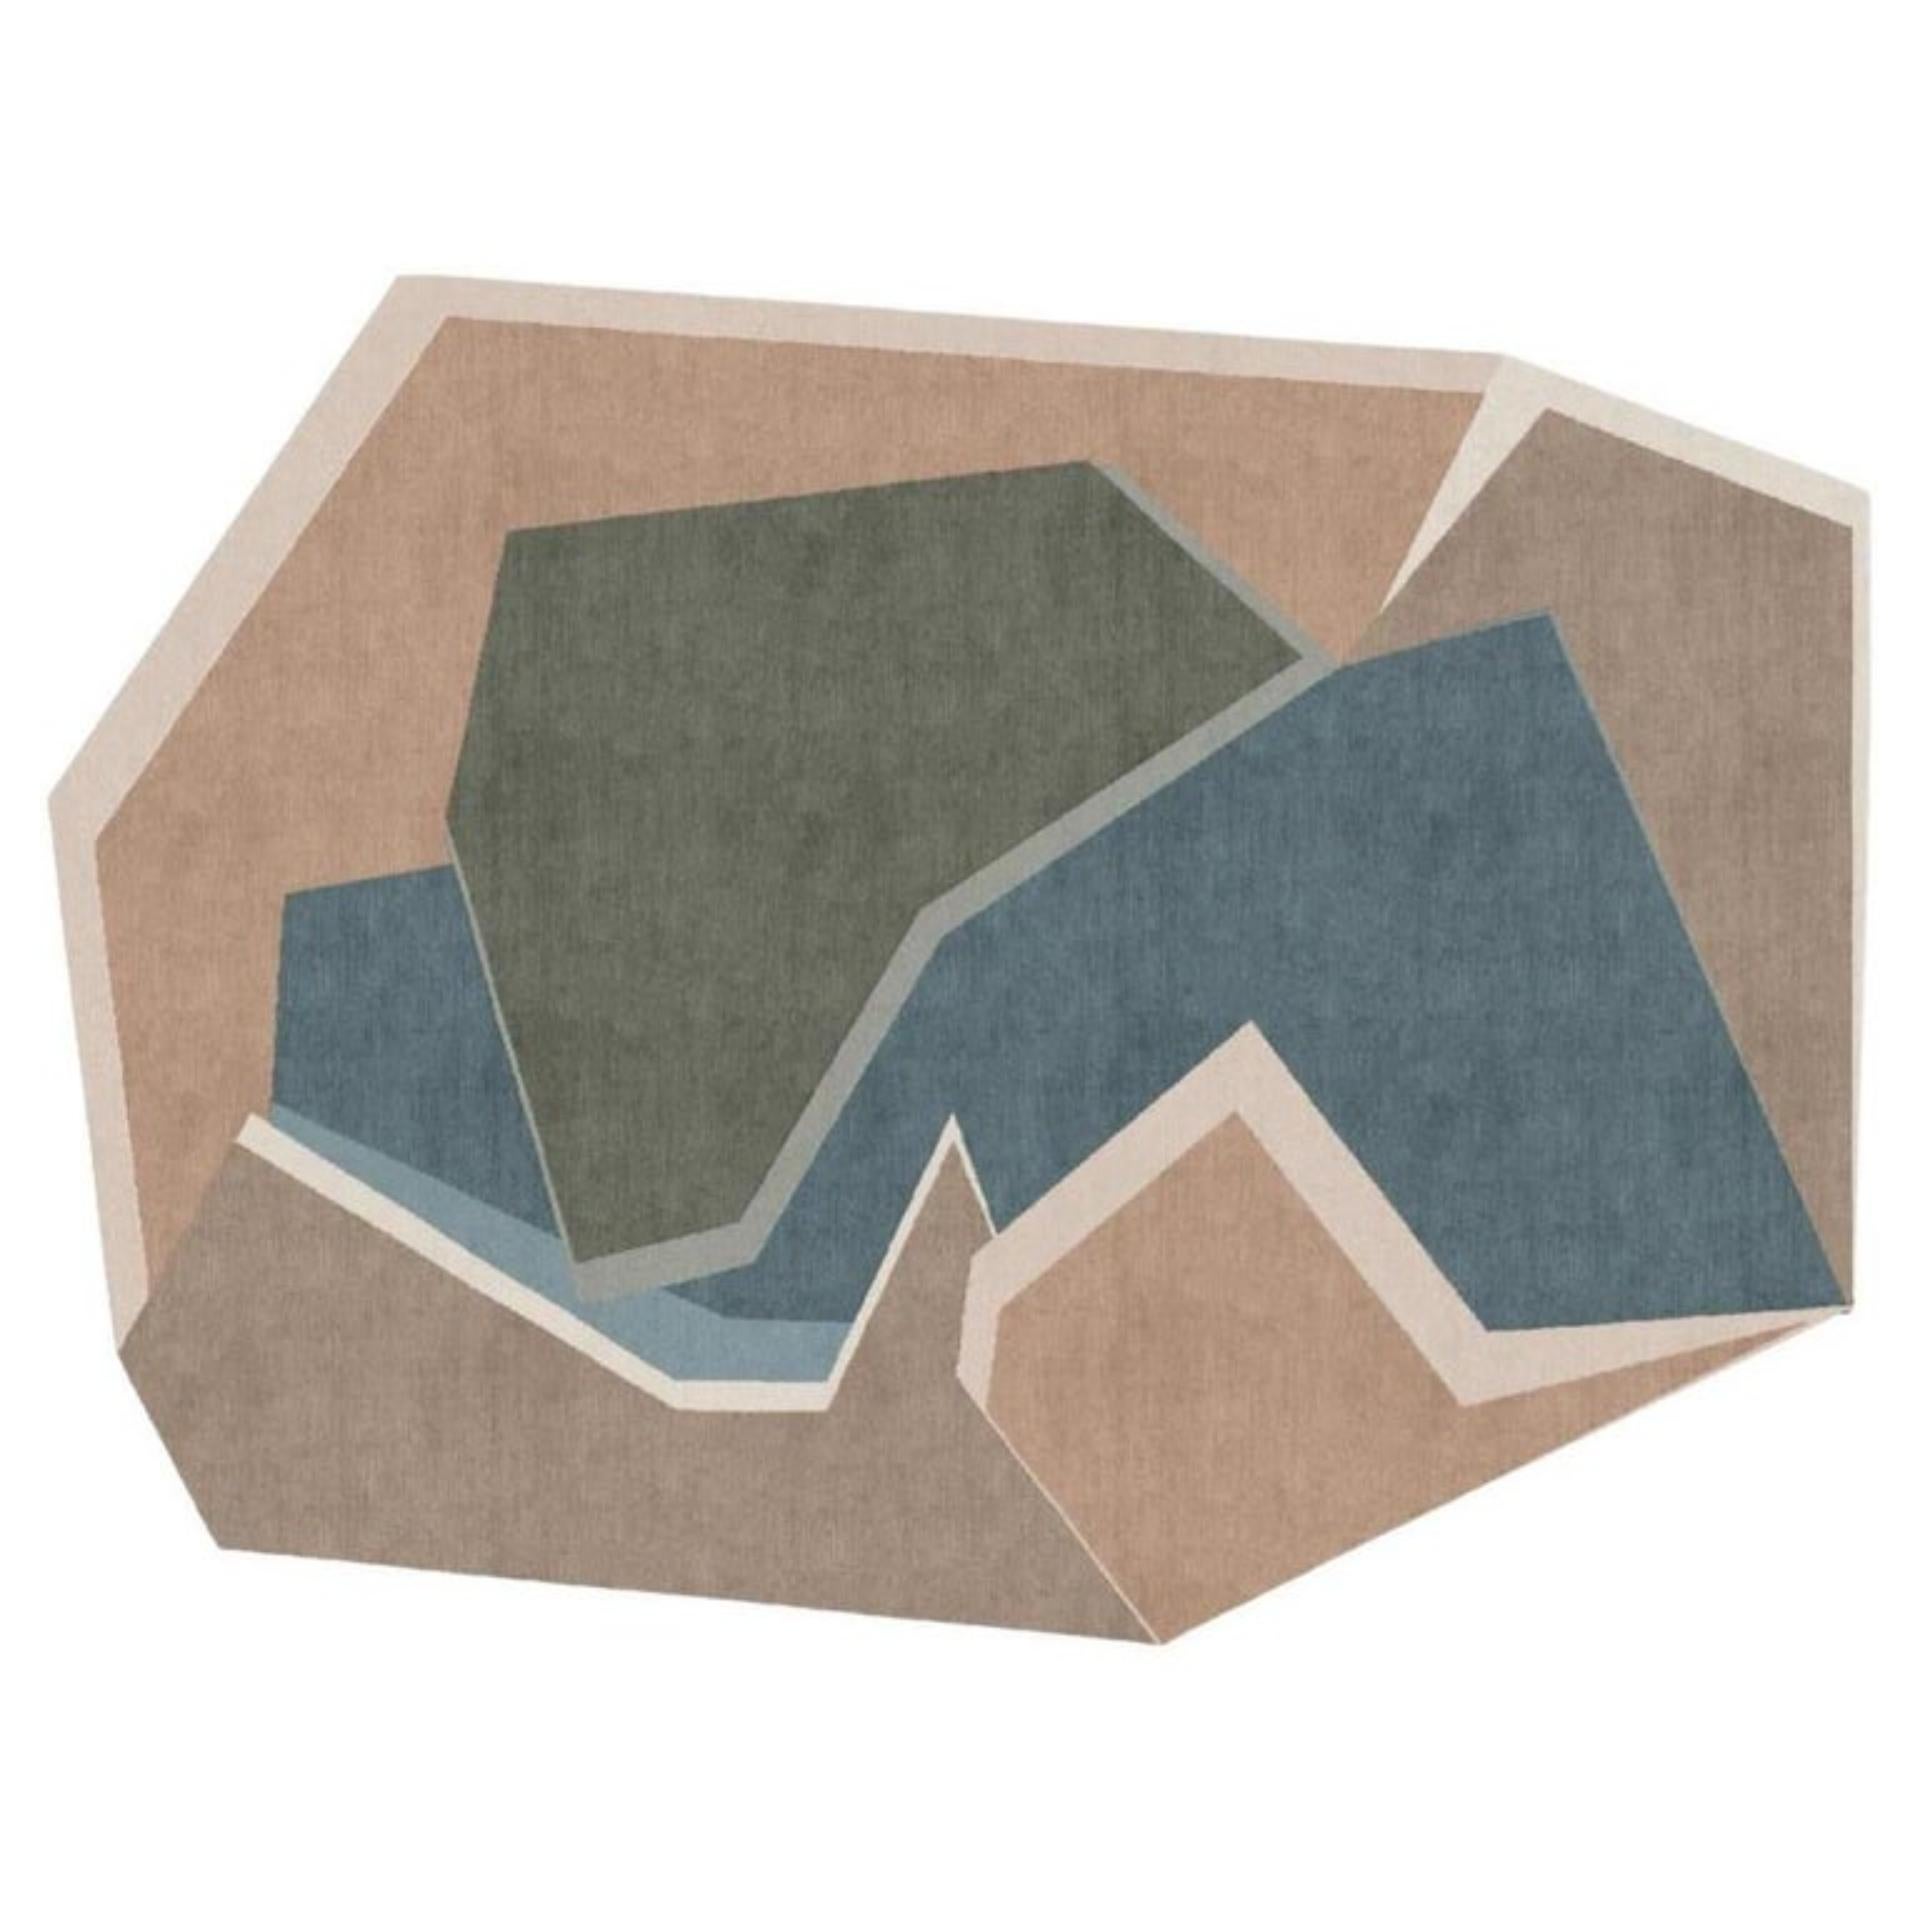 Cocoon medium rug by Art & Loom
Dimensions: D 274.3 x H 365.8 cm
Materials: 100% New Zealand wool
Quality (Knots per Inch): 80
Also available in different dimensions.

Samantha Gallacher has always had a keen eye for aesthetics, drawing